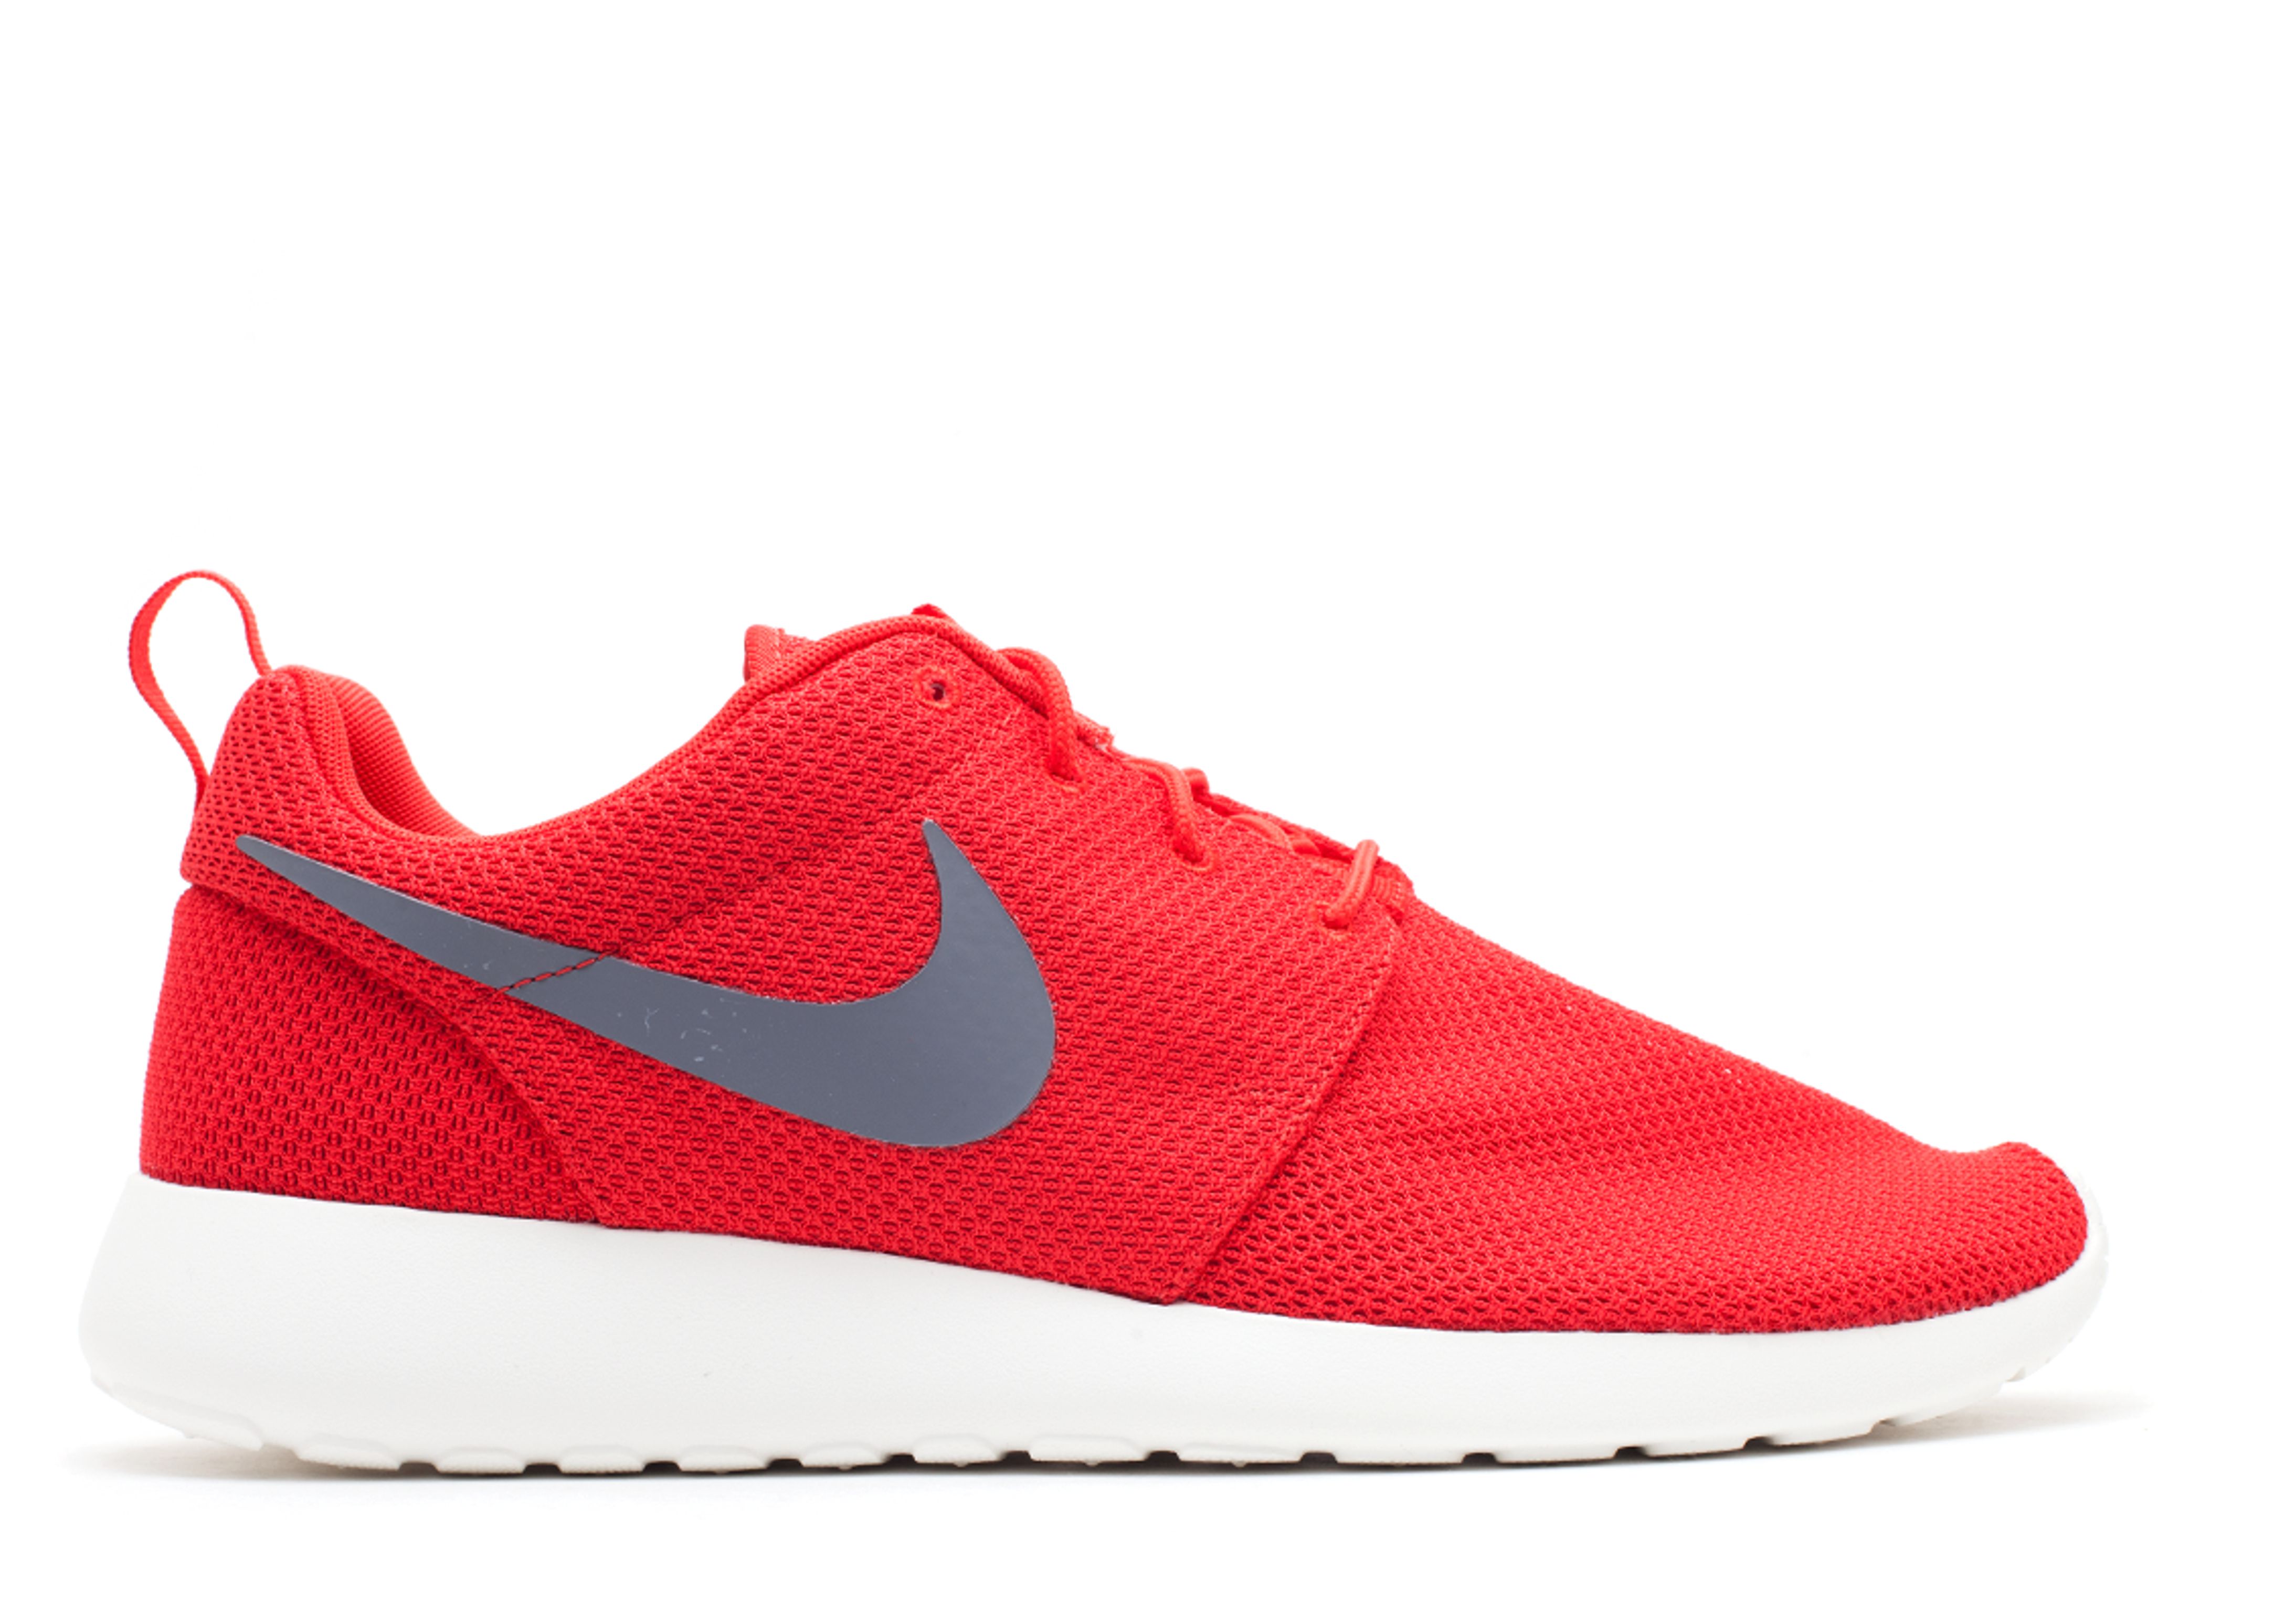 red roshe shoes